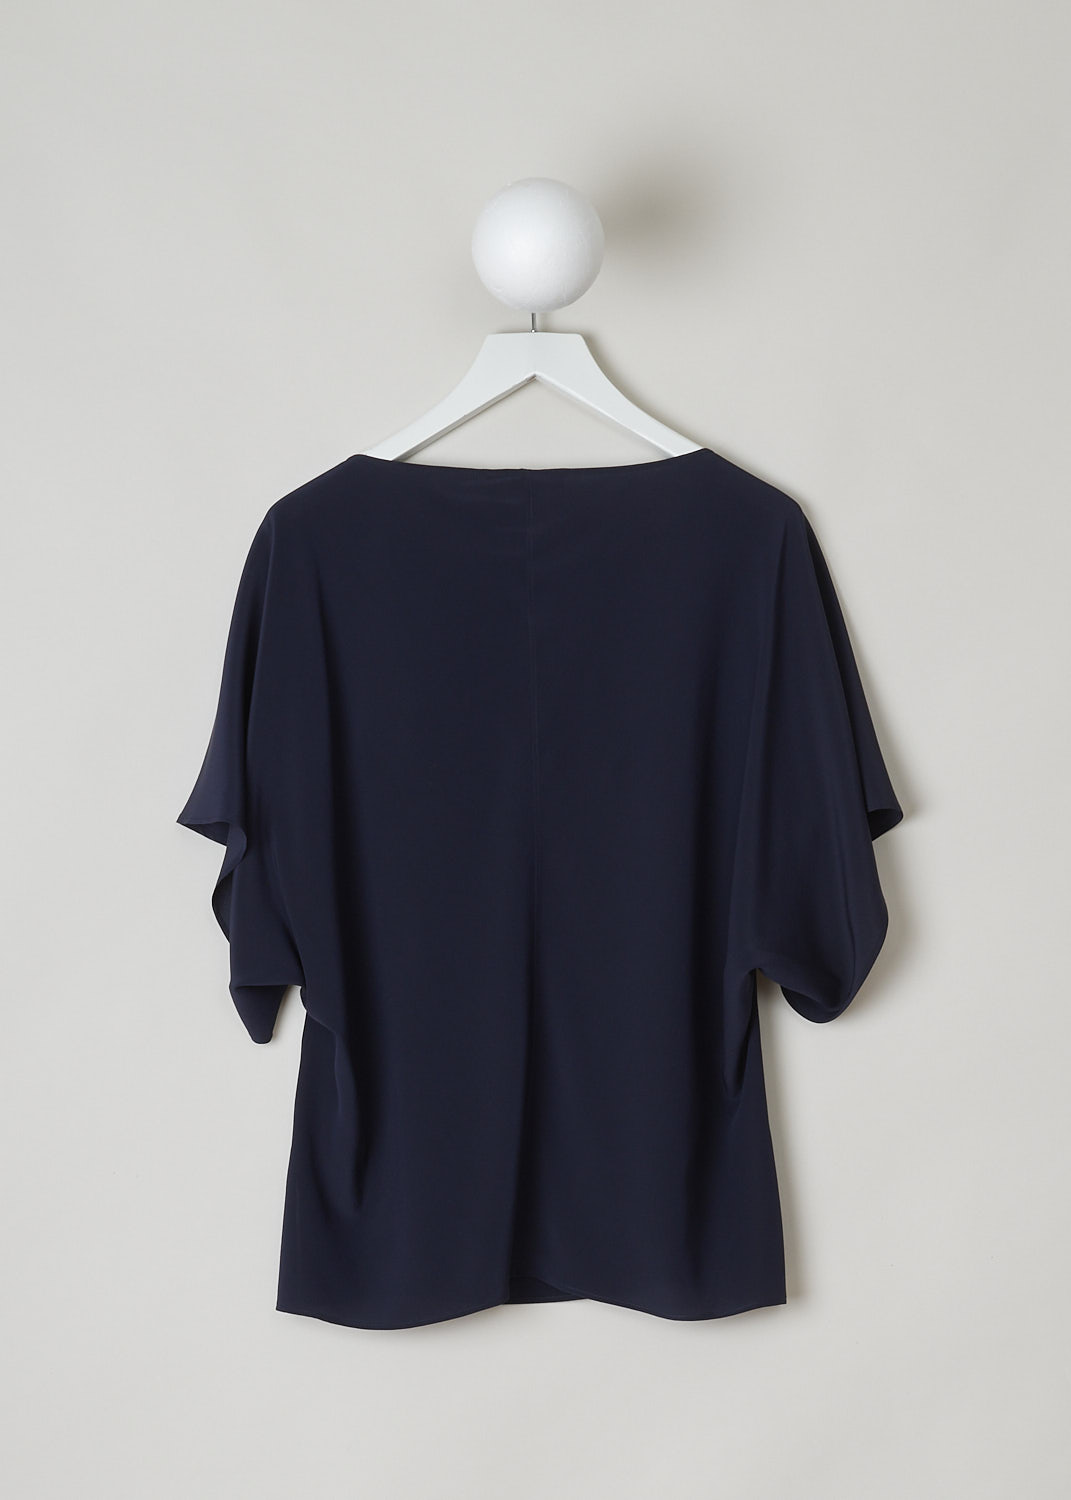 CHLOÃ‰, INK NAVY SILK TOP, CHC22UHT120044C3, Blue, Back, This ink navy blue silk top has a boat neckline and loose short cap sleeves. The top has side slits and a straight hemline. 
